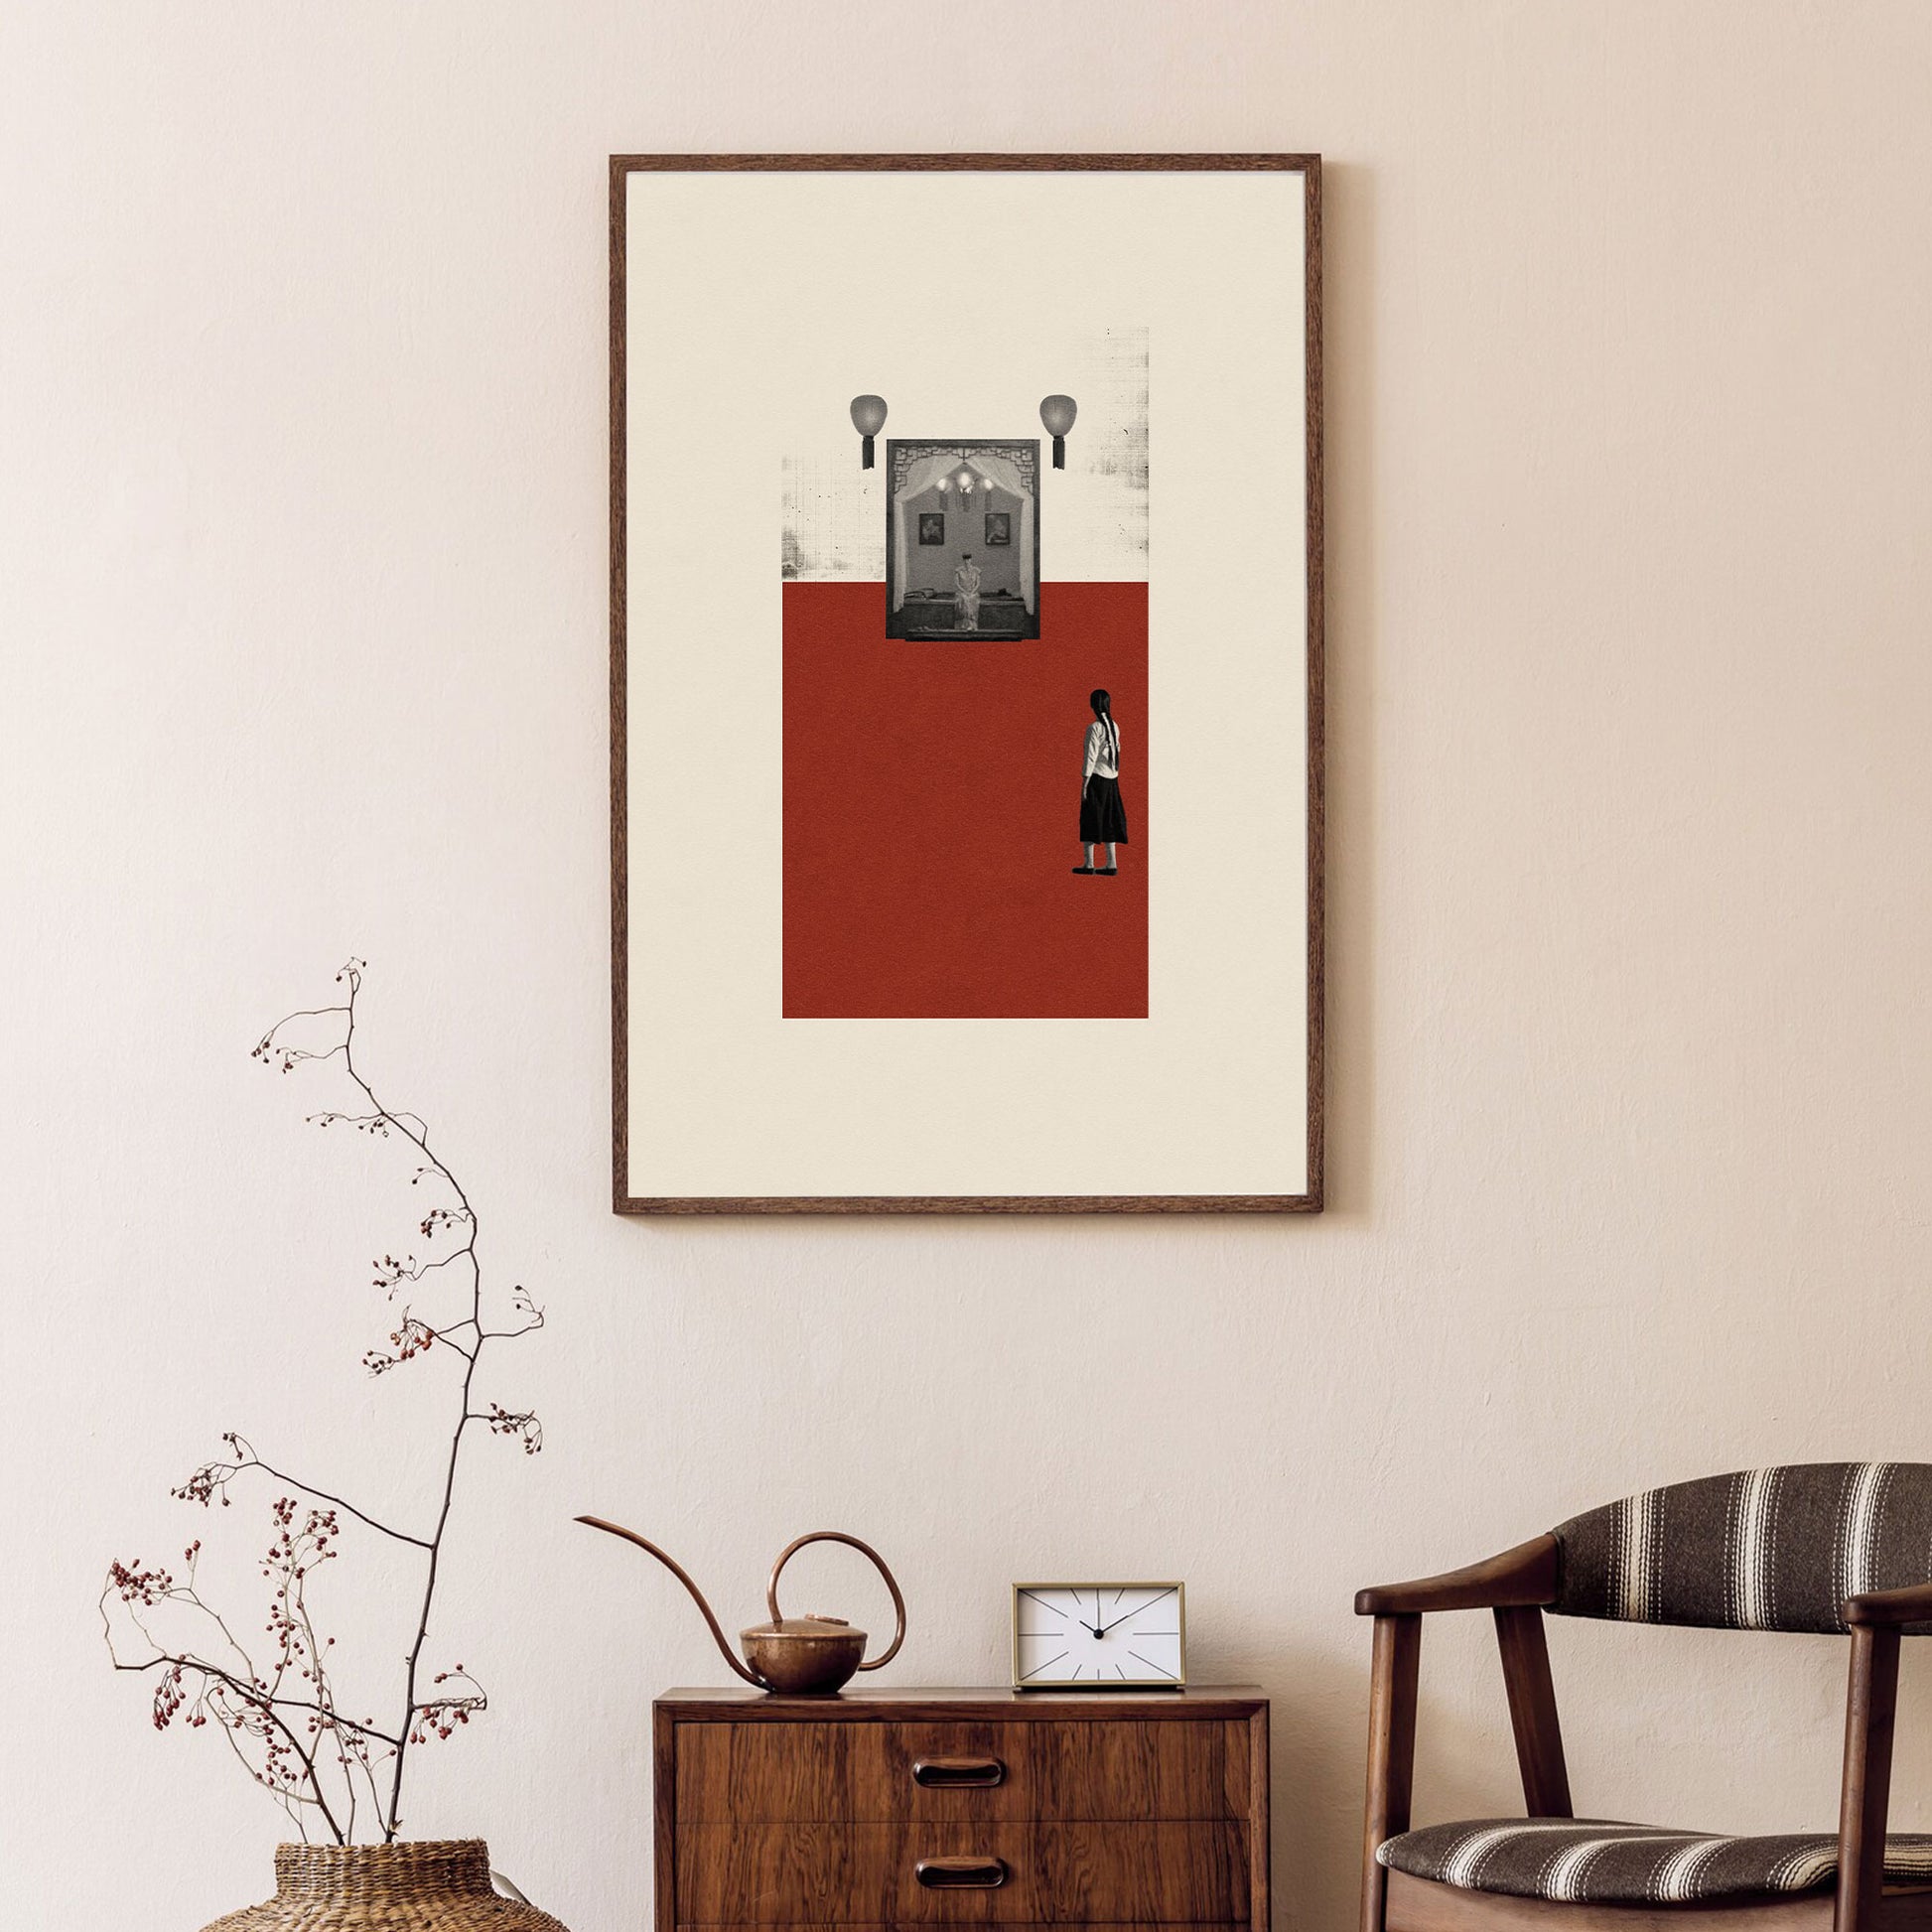 A minimalistic collage art print featuring a woman in front of a red door with lantern